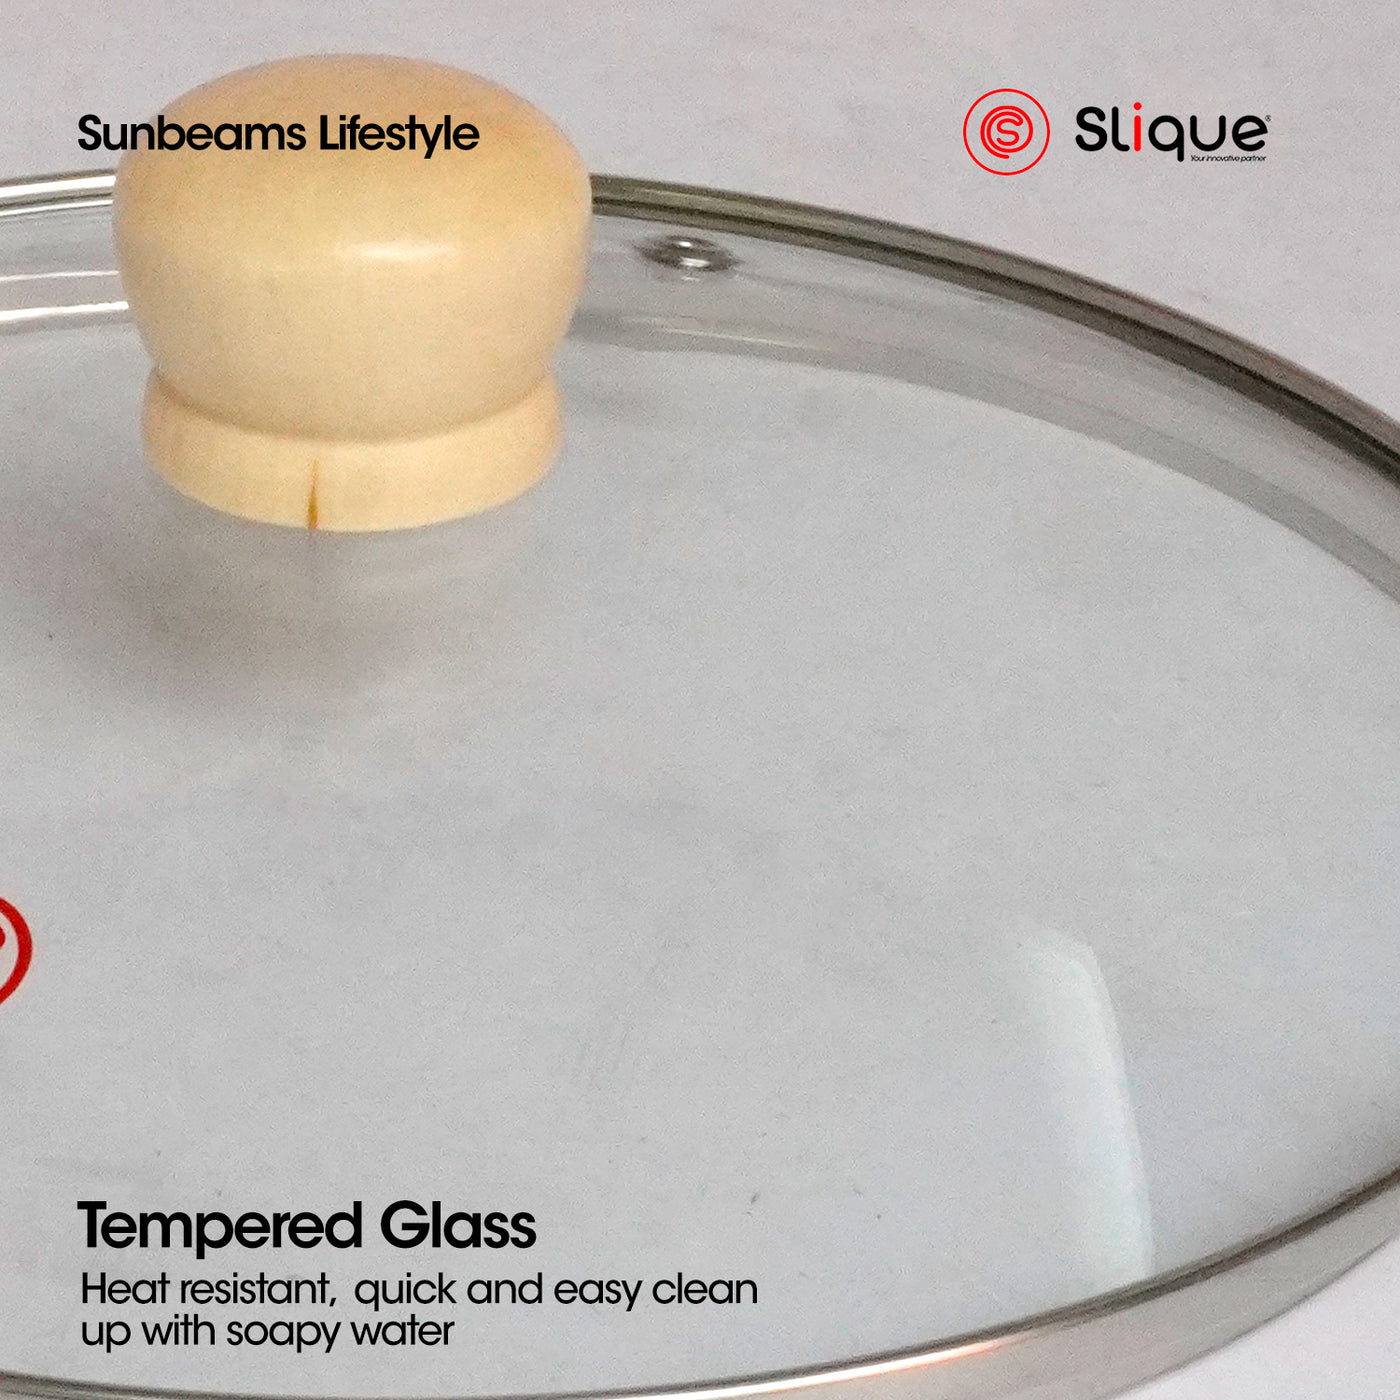 Slique Glass Lid Tempered Glass & Stainless Steel Rim with wooden knob Suitable for Fry pan, Wok pan & Dutch Oven Pan Healthy Cooking Essentials Amazing Gift Idea For Any Occasion!